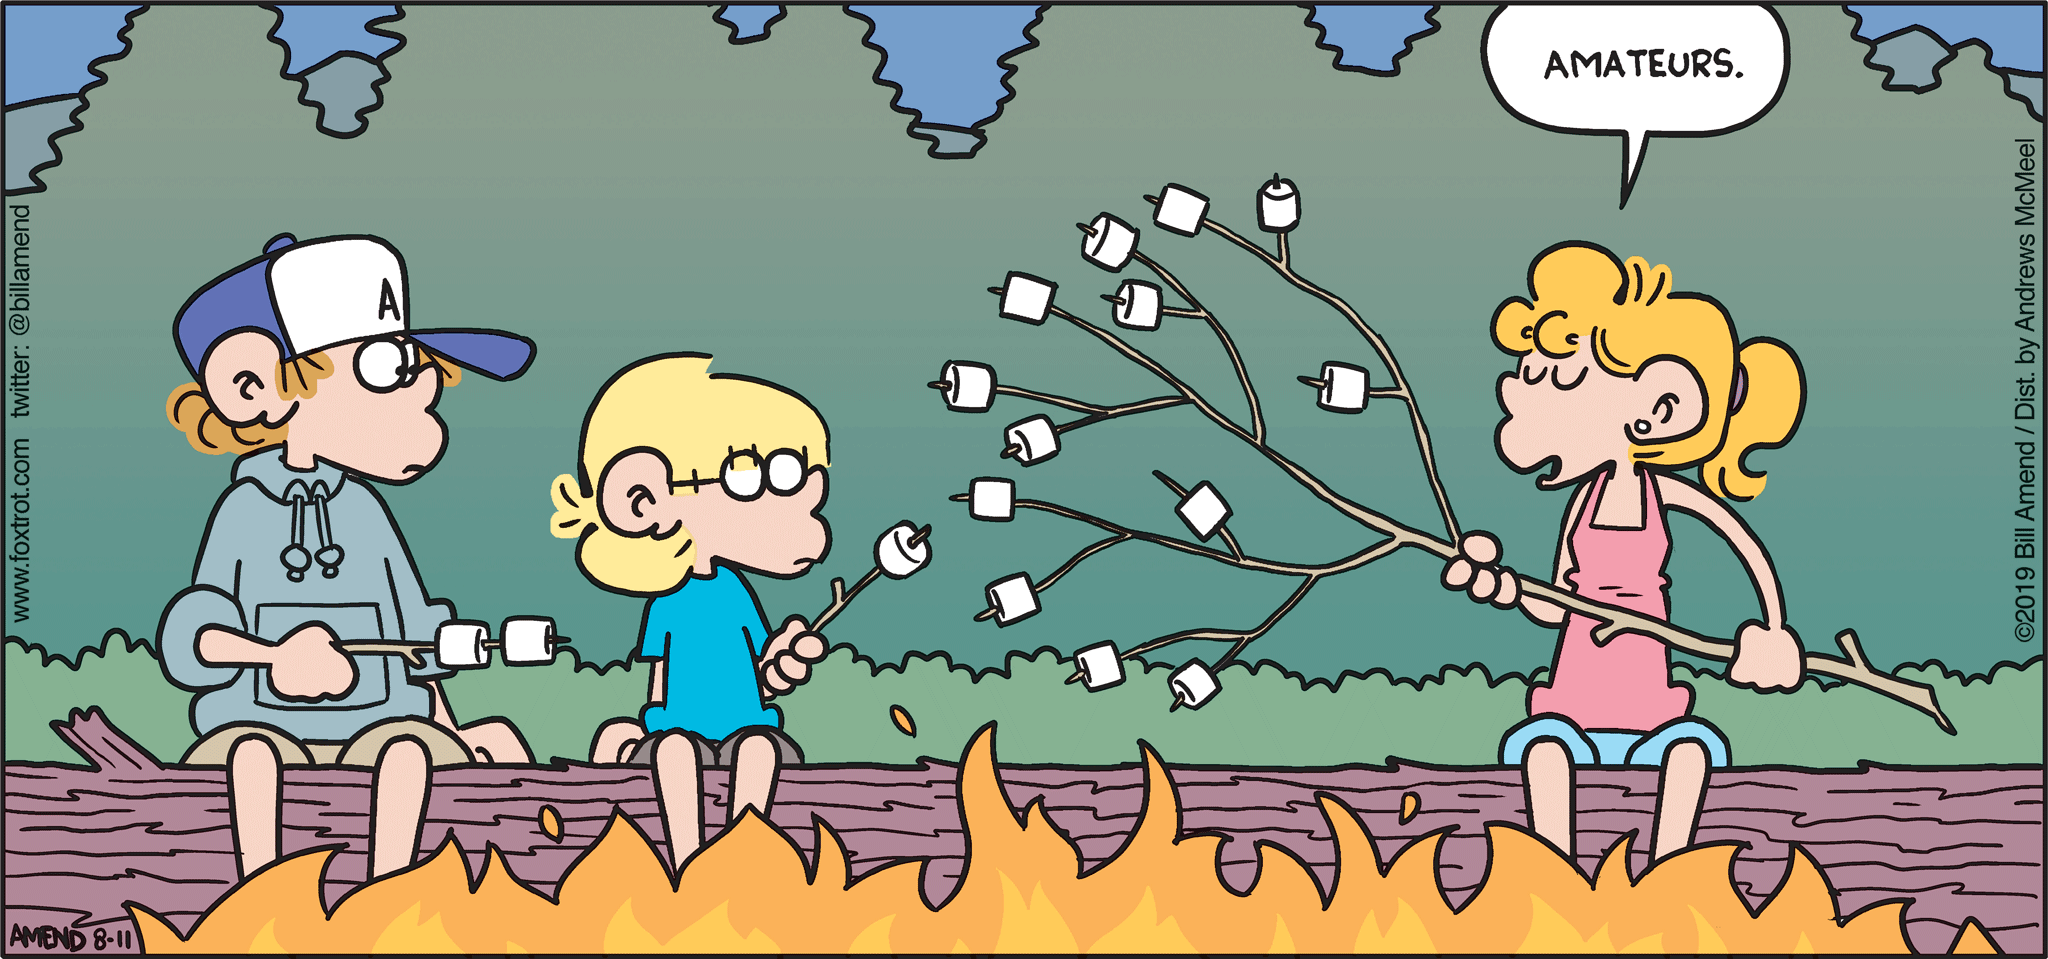 FoxTrot by Bill Amend - "Mostmallows" published August 11, 2019 - Paige: Amateurs.